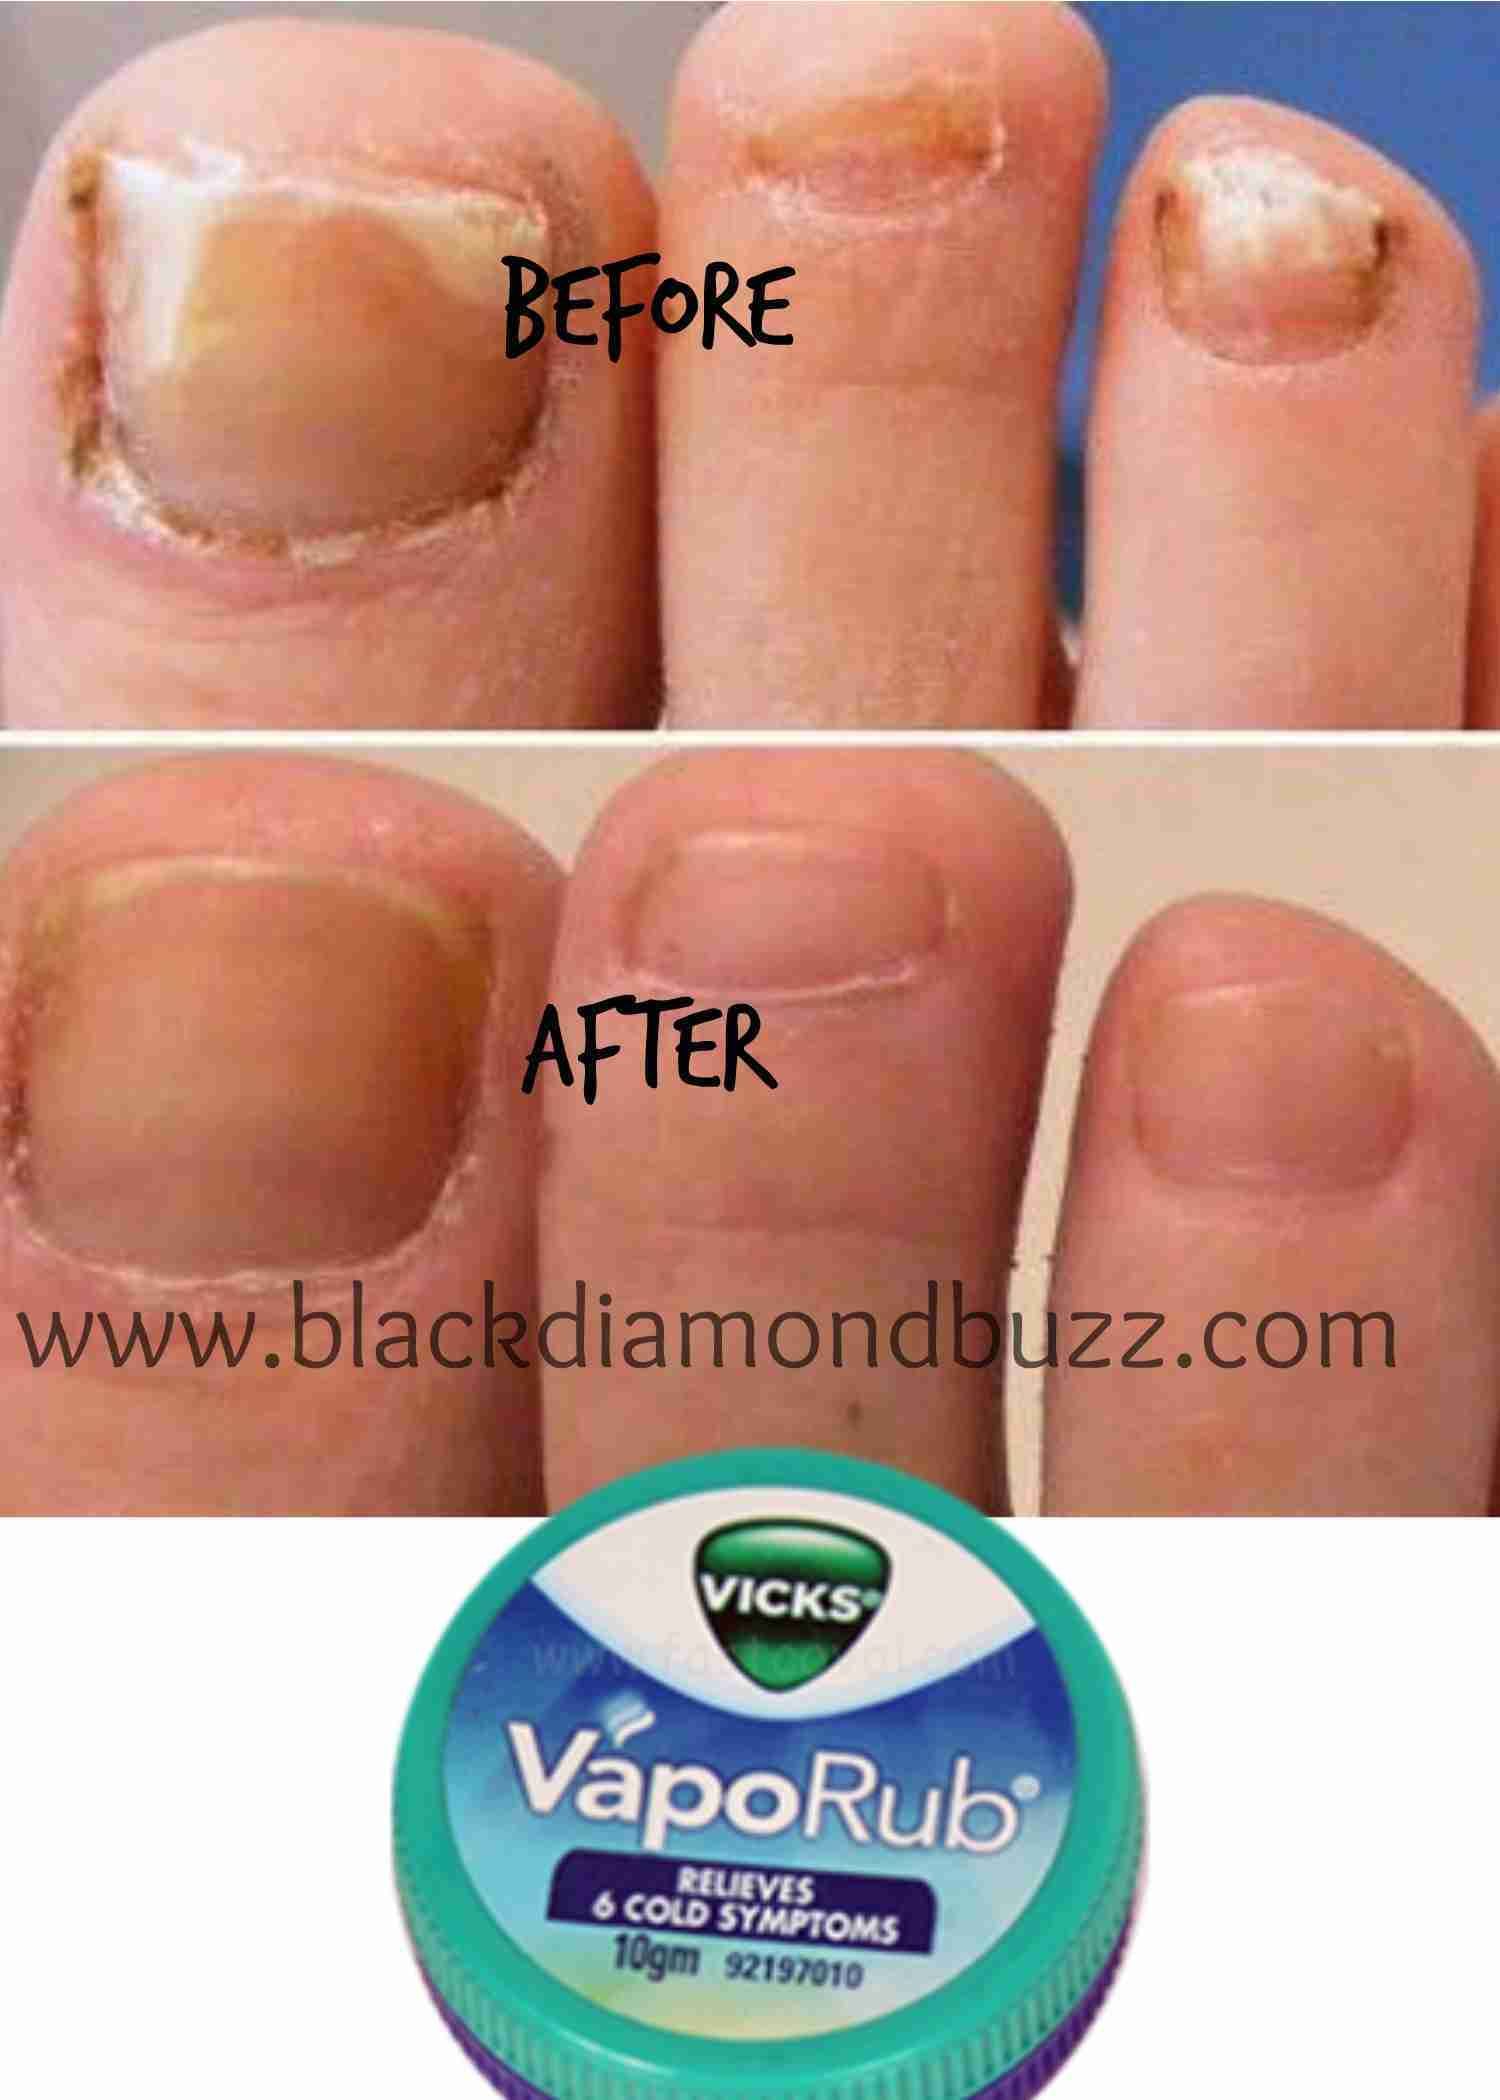 13 Myths Uncovered About Vicks Vaporub Uses (With images ...